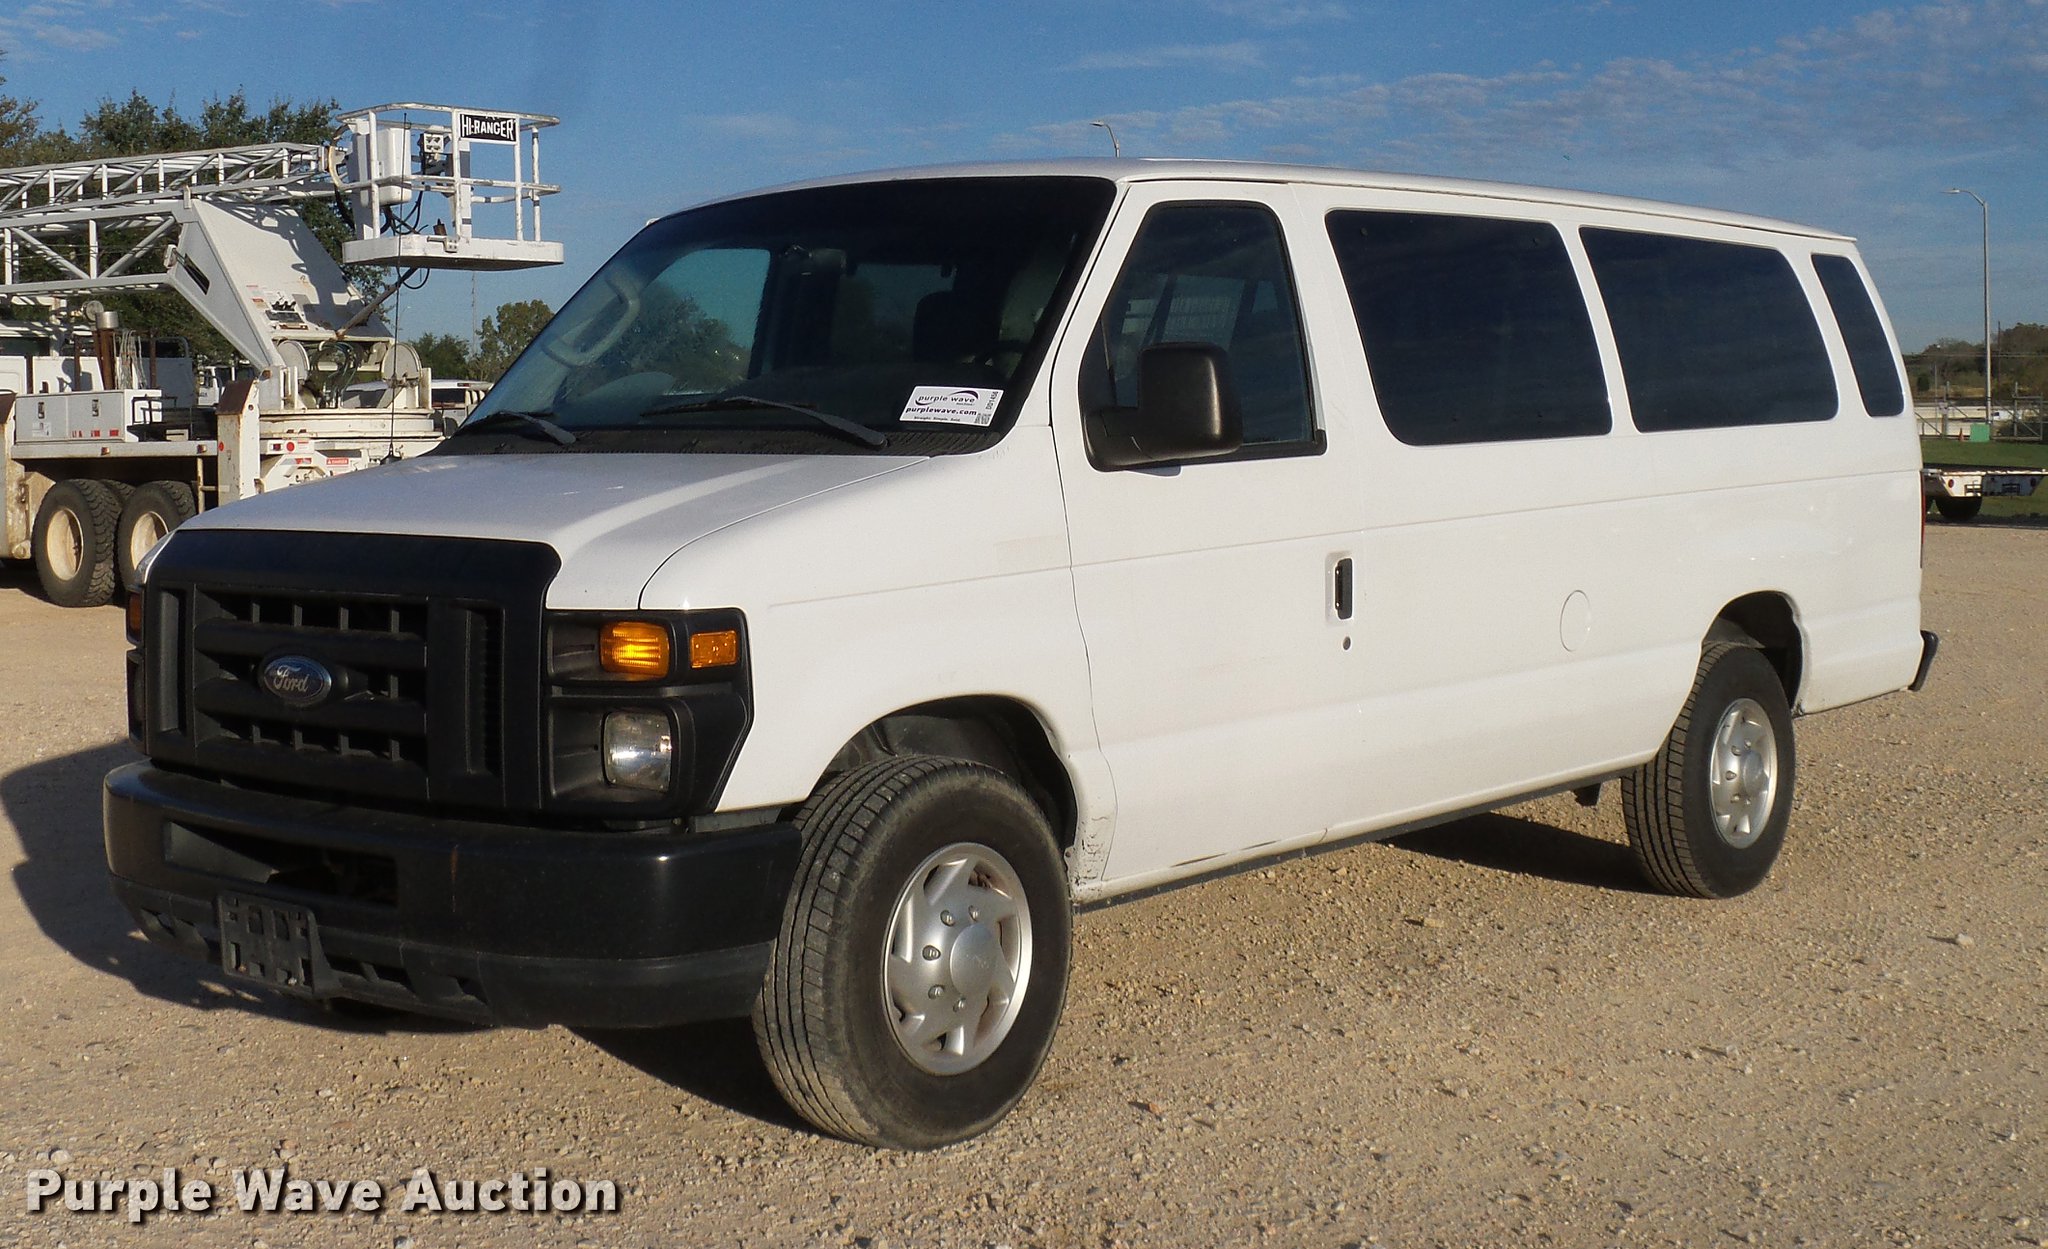 2011 Ford E350 Super Duty Extended van in Austin, TX | Item DD1456 sold |  Purple Wave